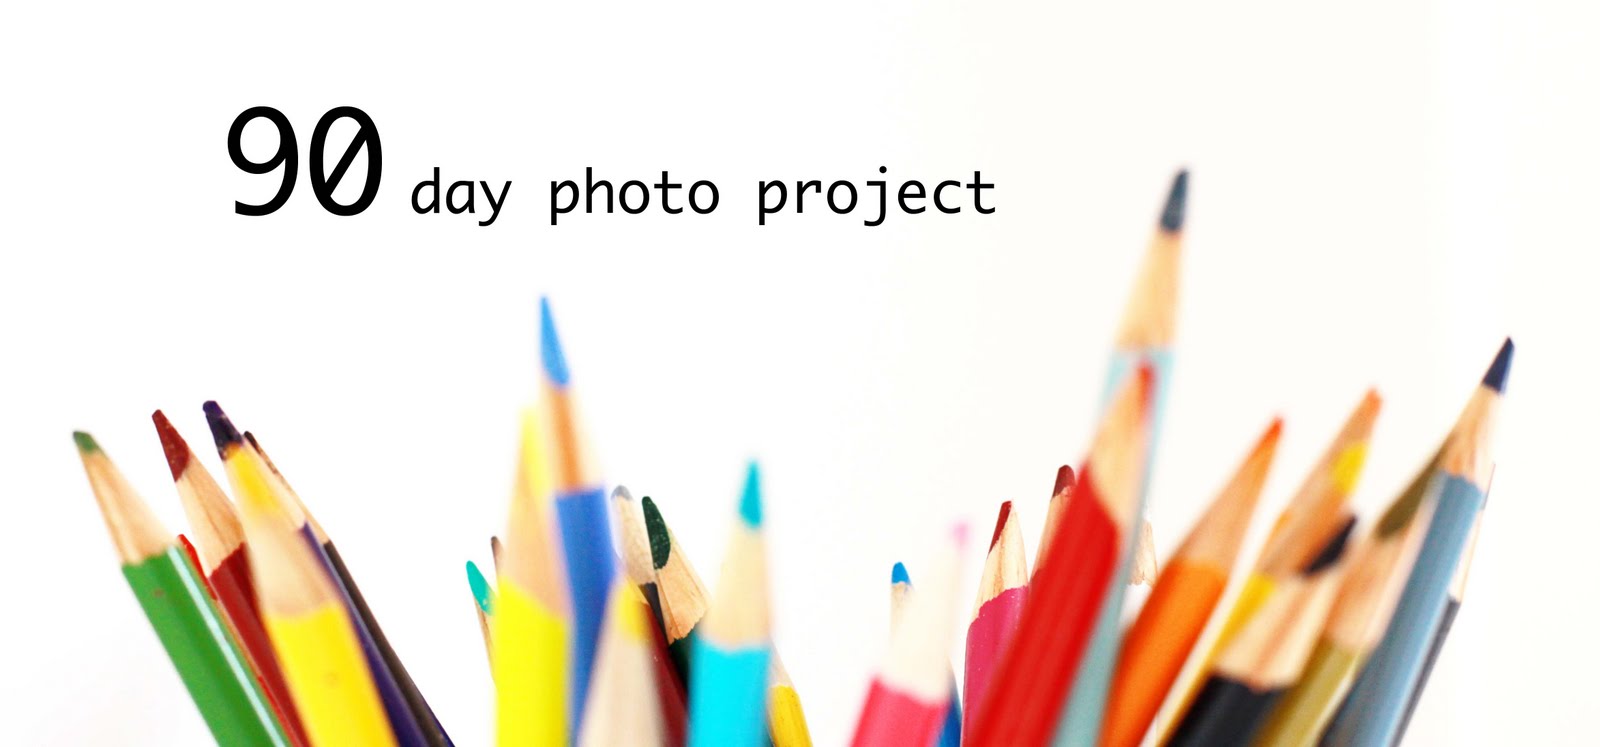 90 day photo project